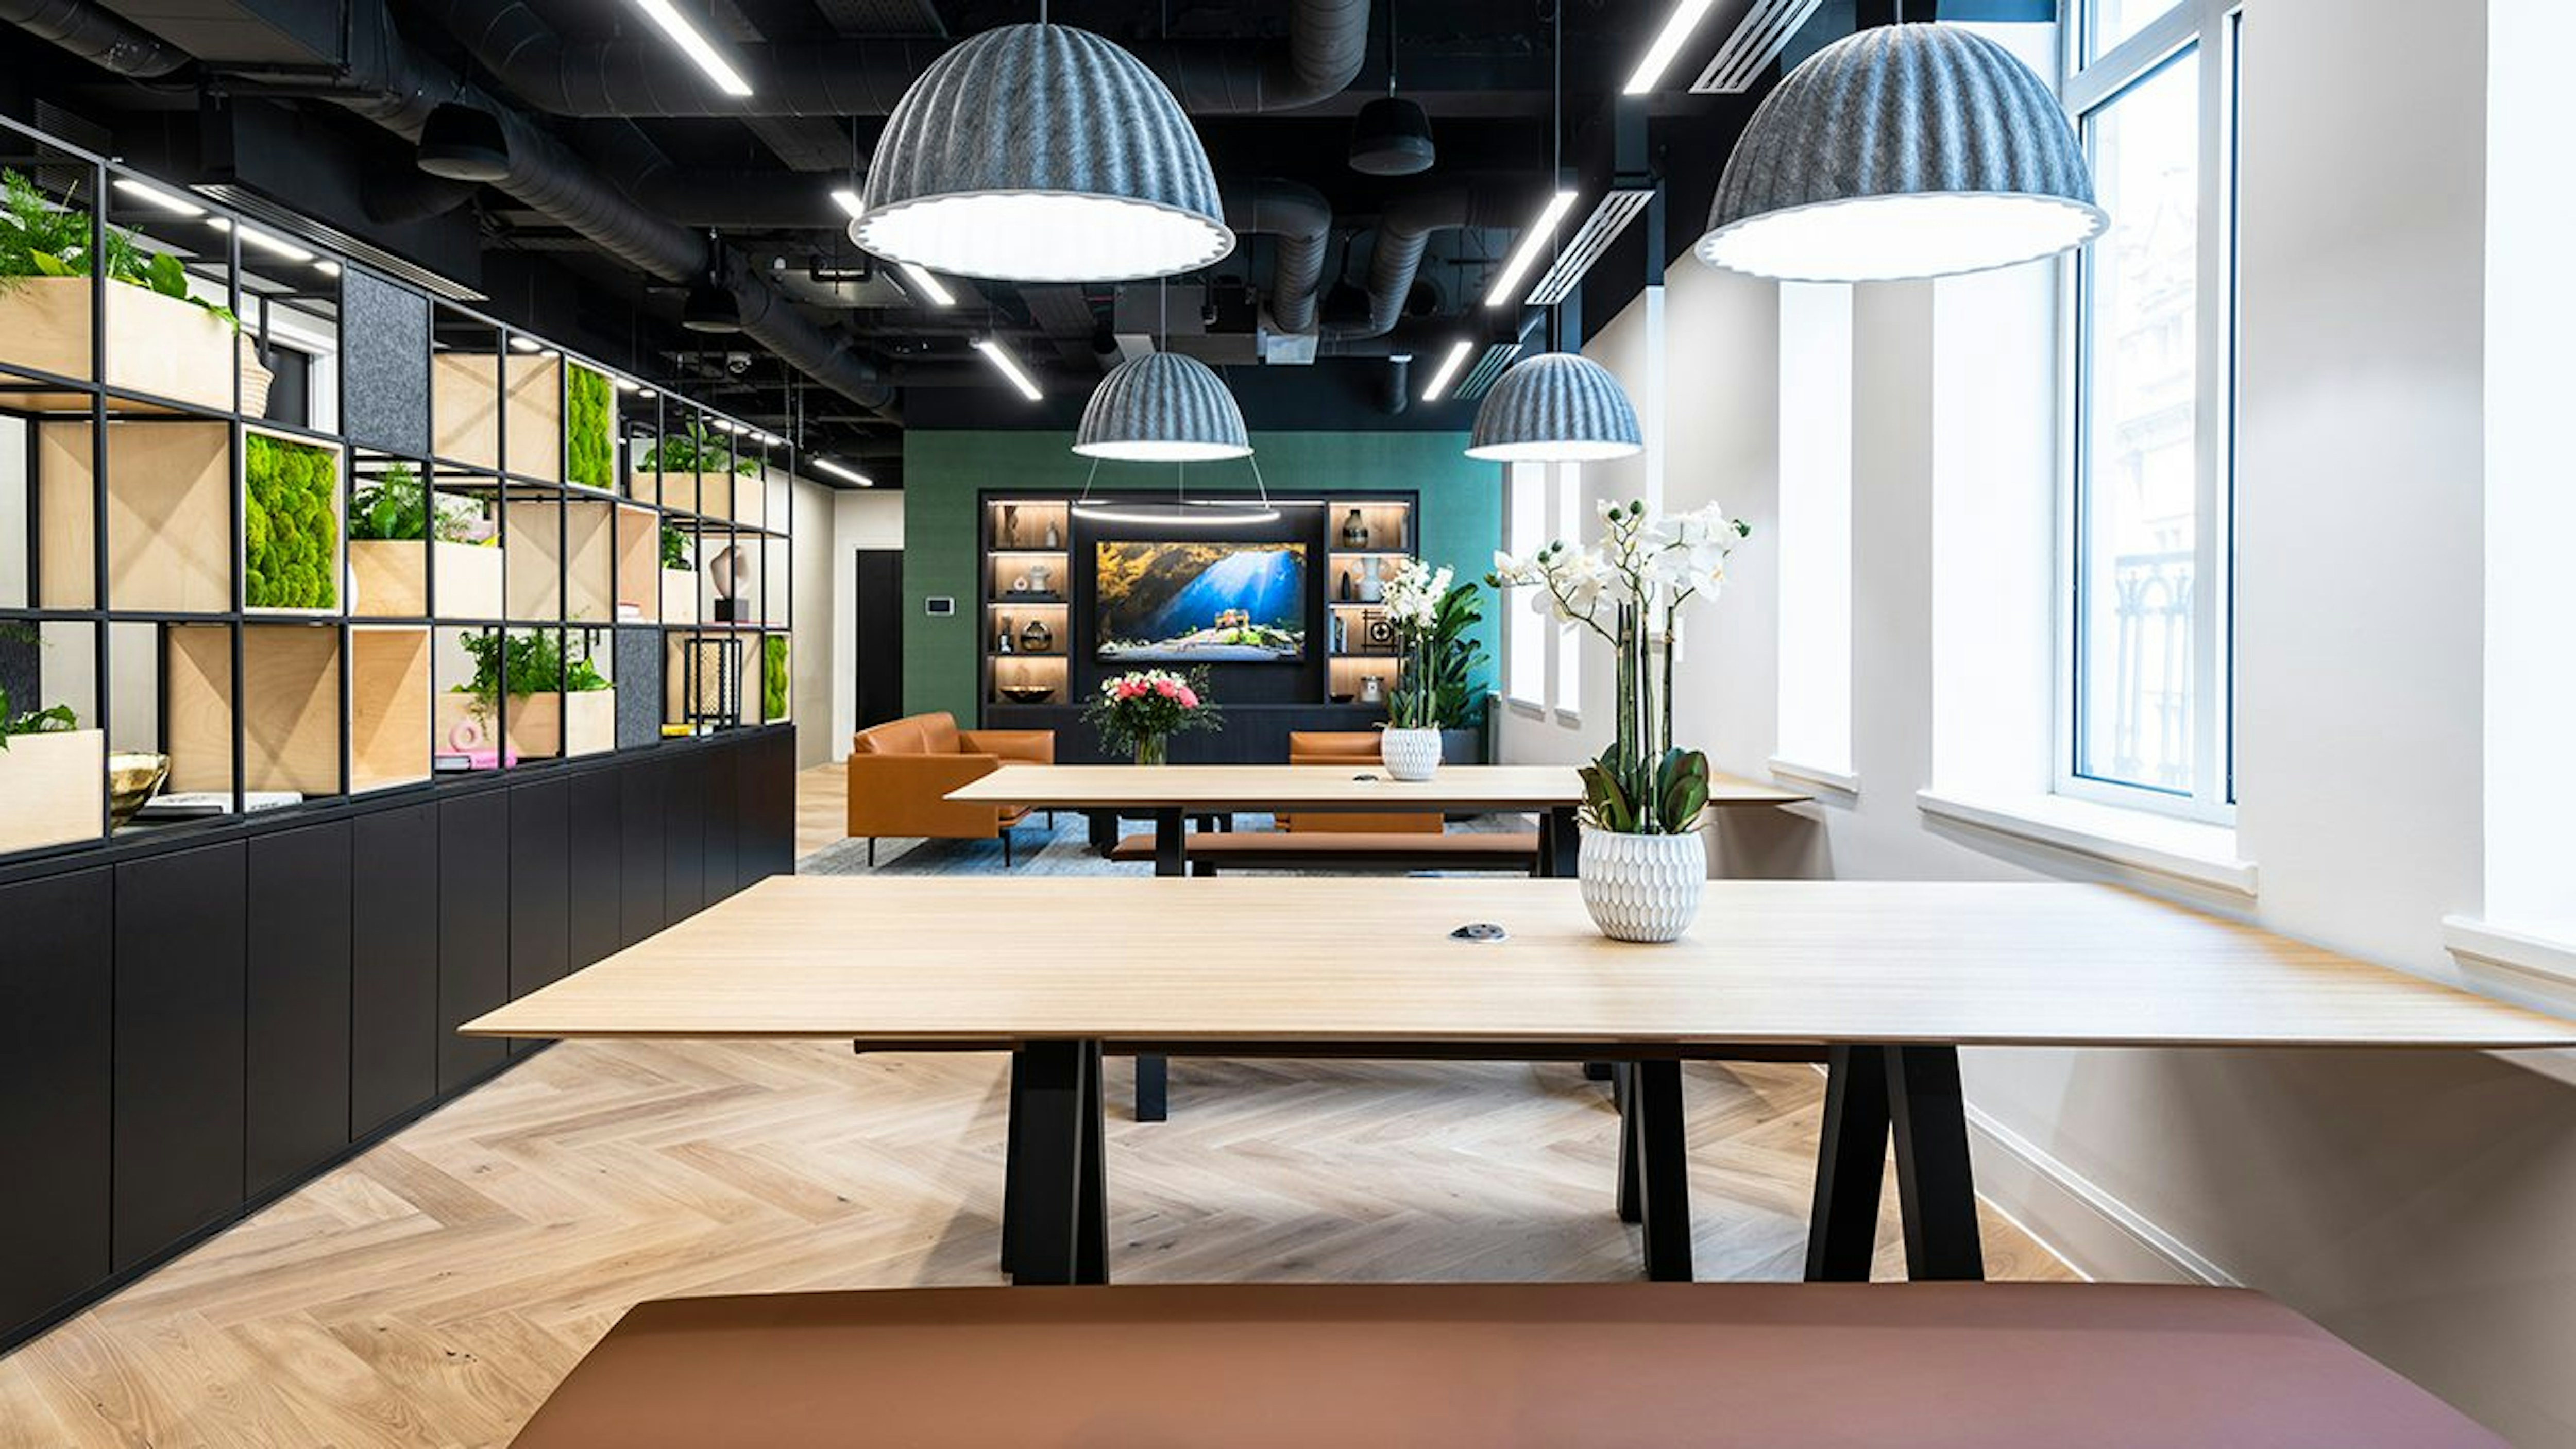 The 7 Best Materials for a Modern Office Interior Design